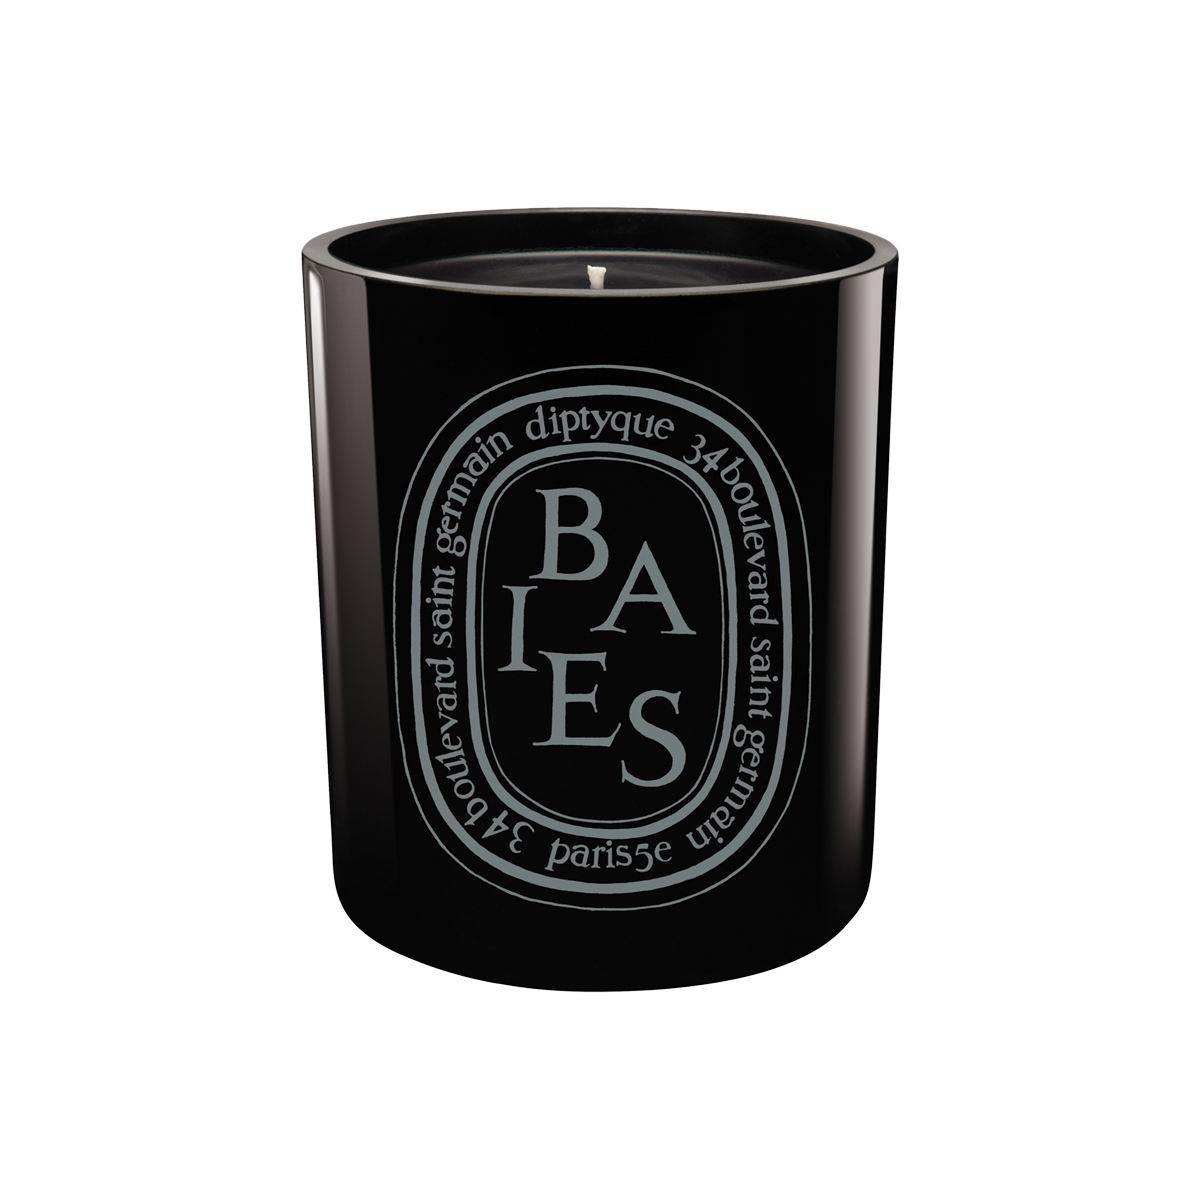 Diptyque - Baies Colored Scented Candle